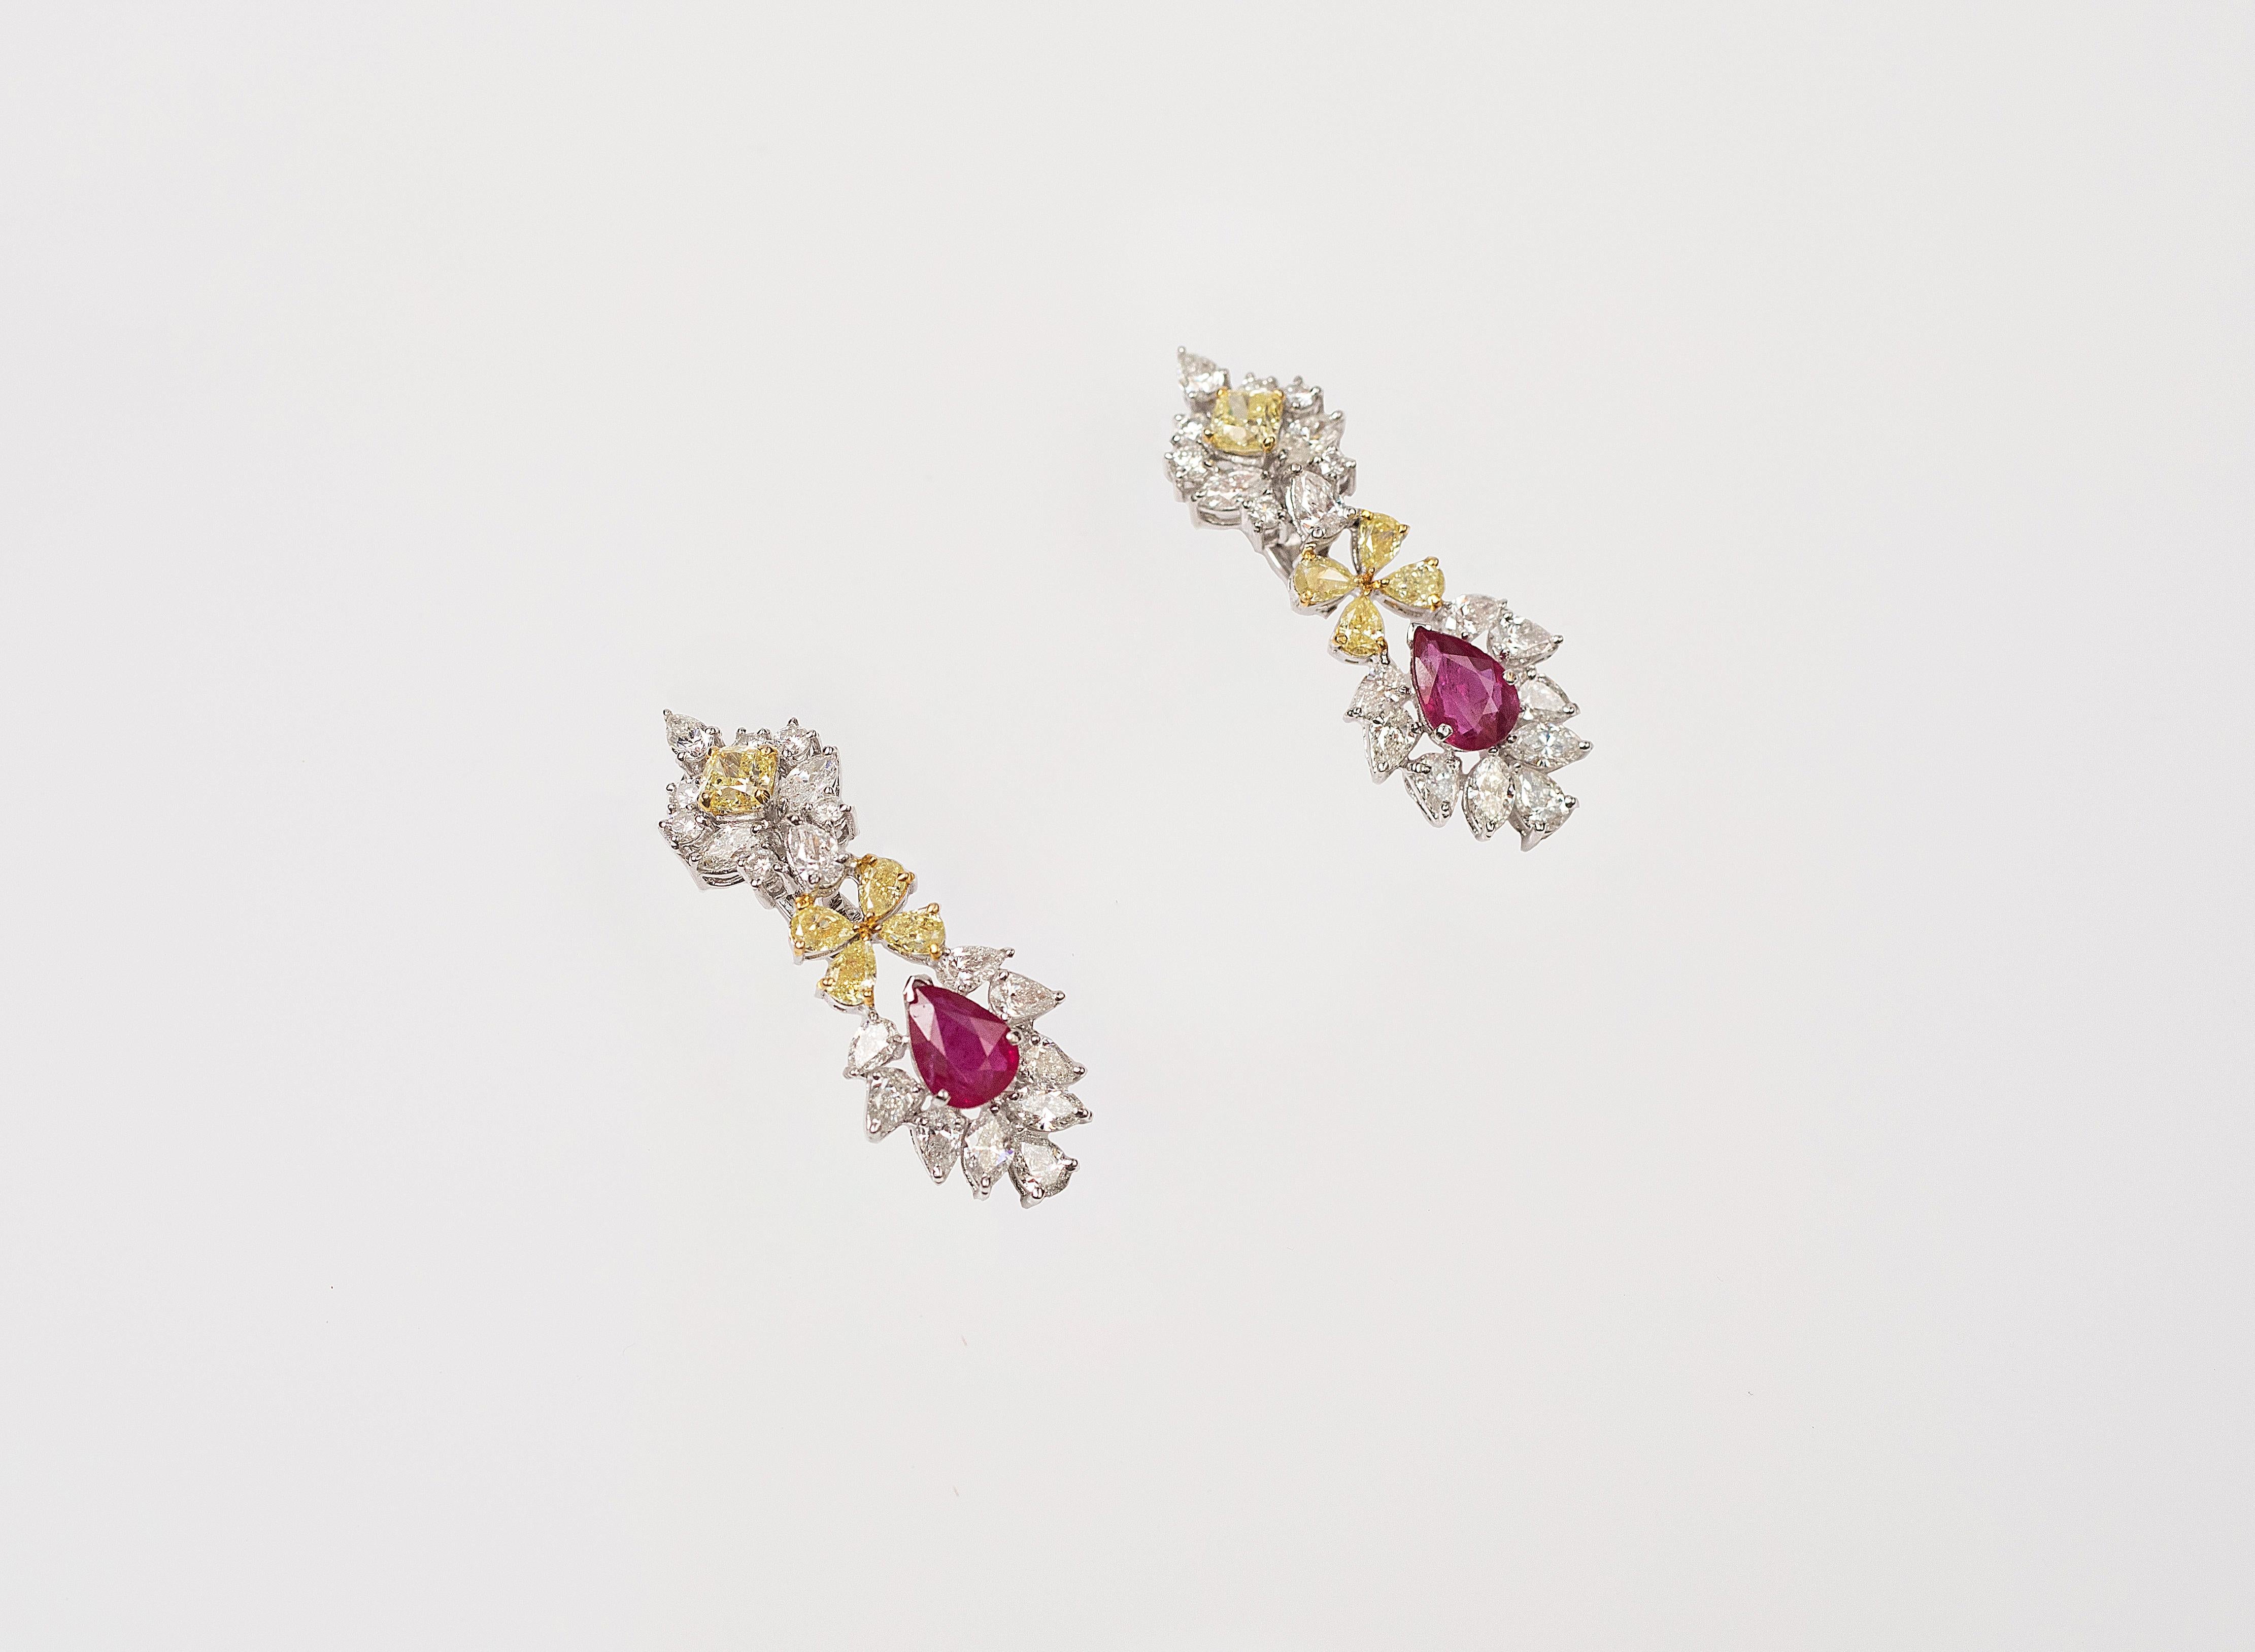 Handcrafted Earrings in 18K Gold Studded with Natural Fancy Yellow Diamonds, White Diamonds and Natural Heated Ruby.

Gold Weight - 18.160 gms

Diamond Details - 
Clarity - Vs-Si
Colour - Natural Fancy Yellow and G Colour

Ruby - Natural Ruby